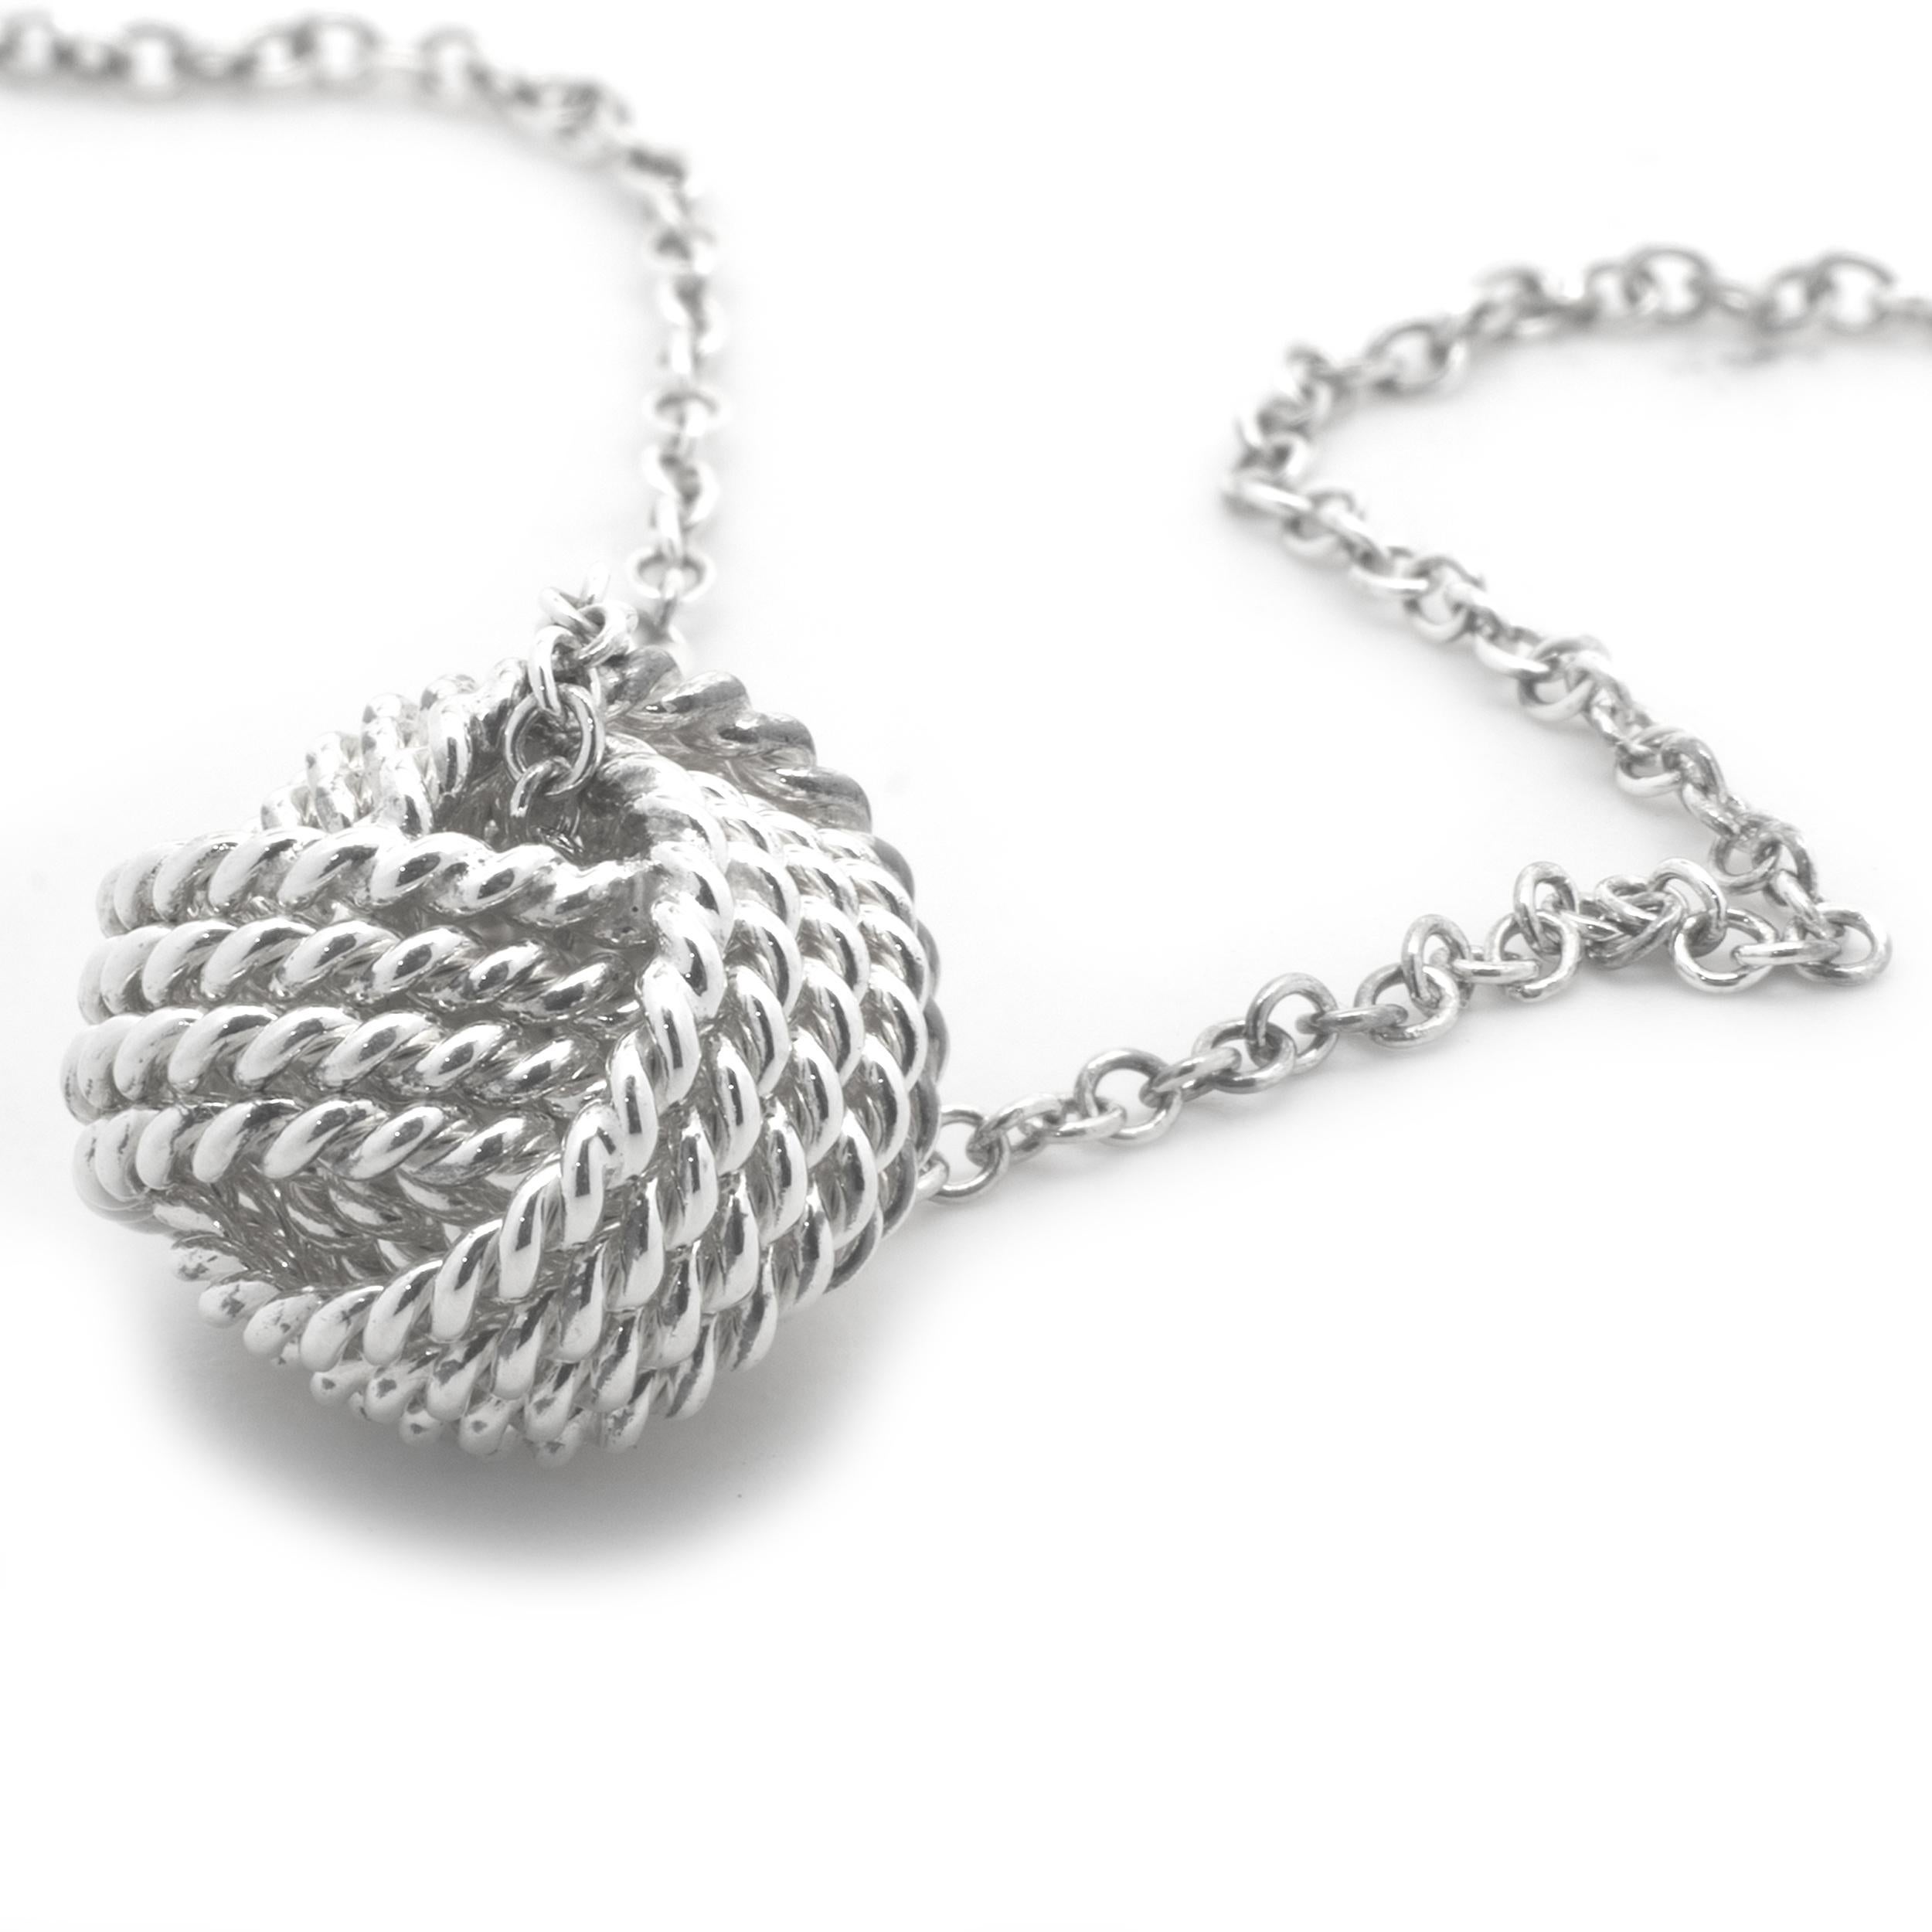 tiffany knot necklace silver